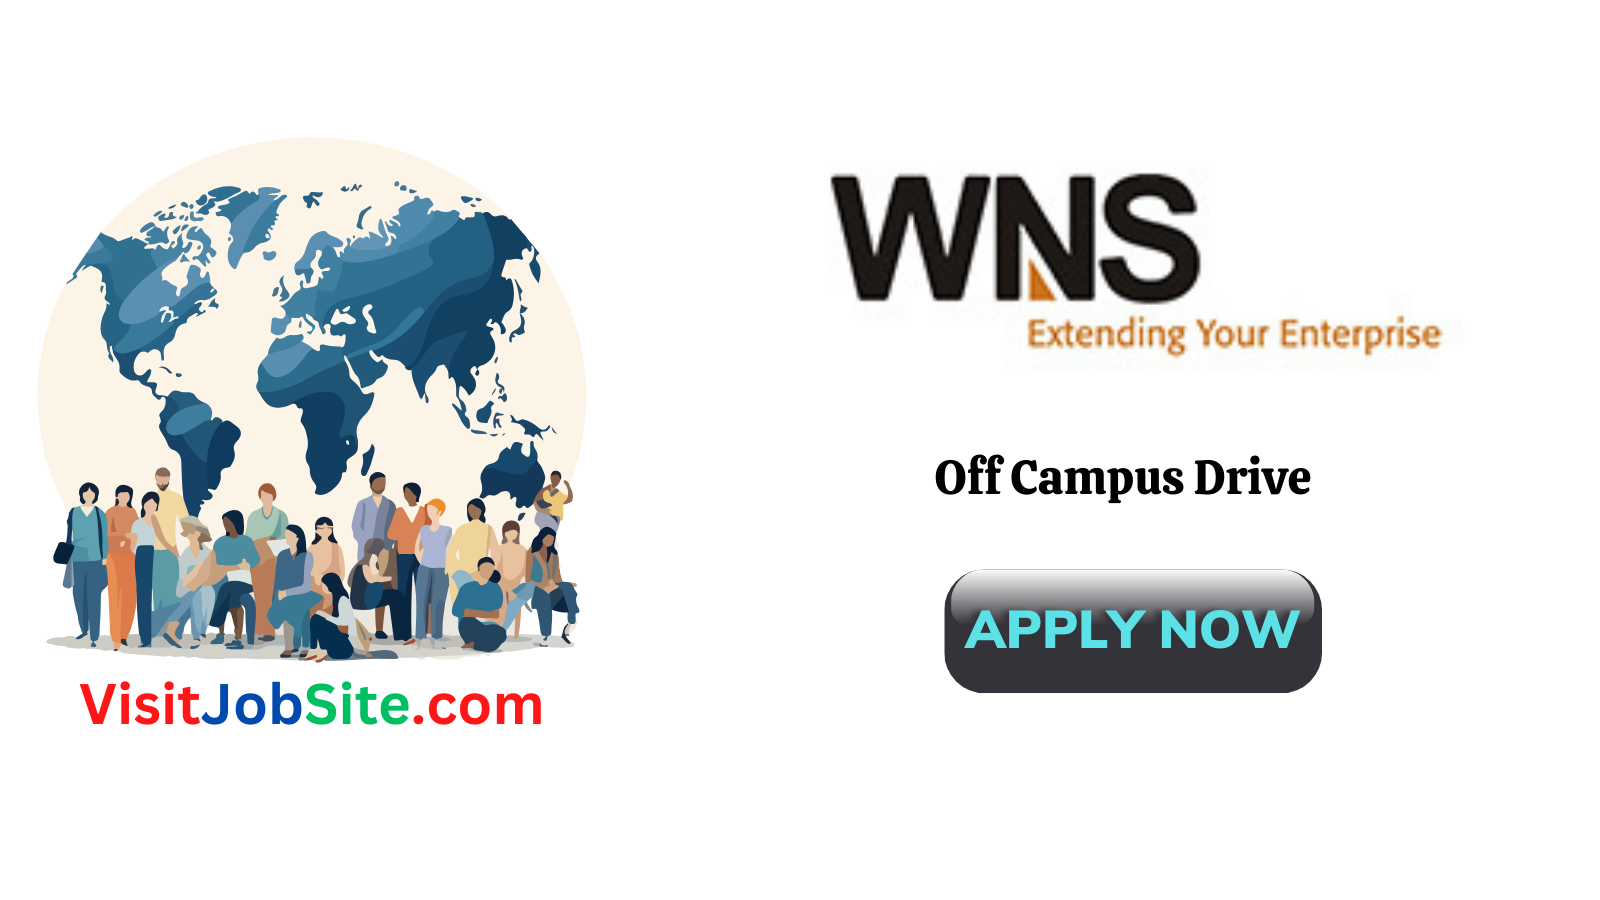 WNS Holdings Off Campus Drive